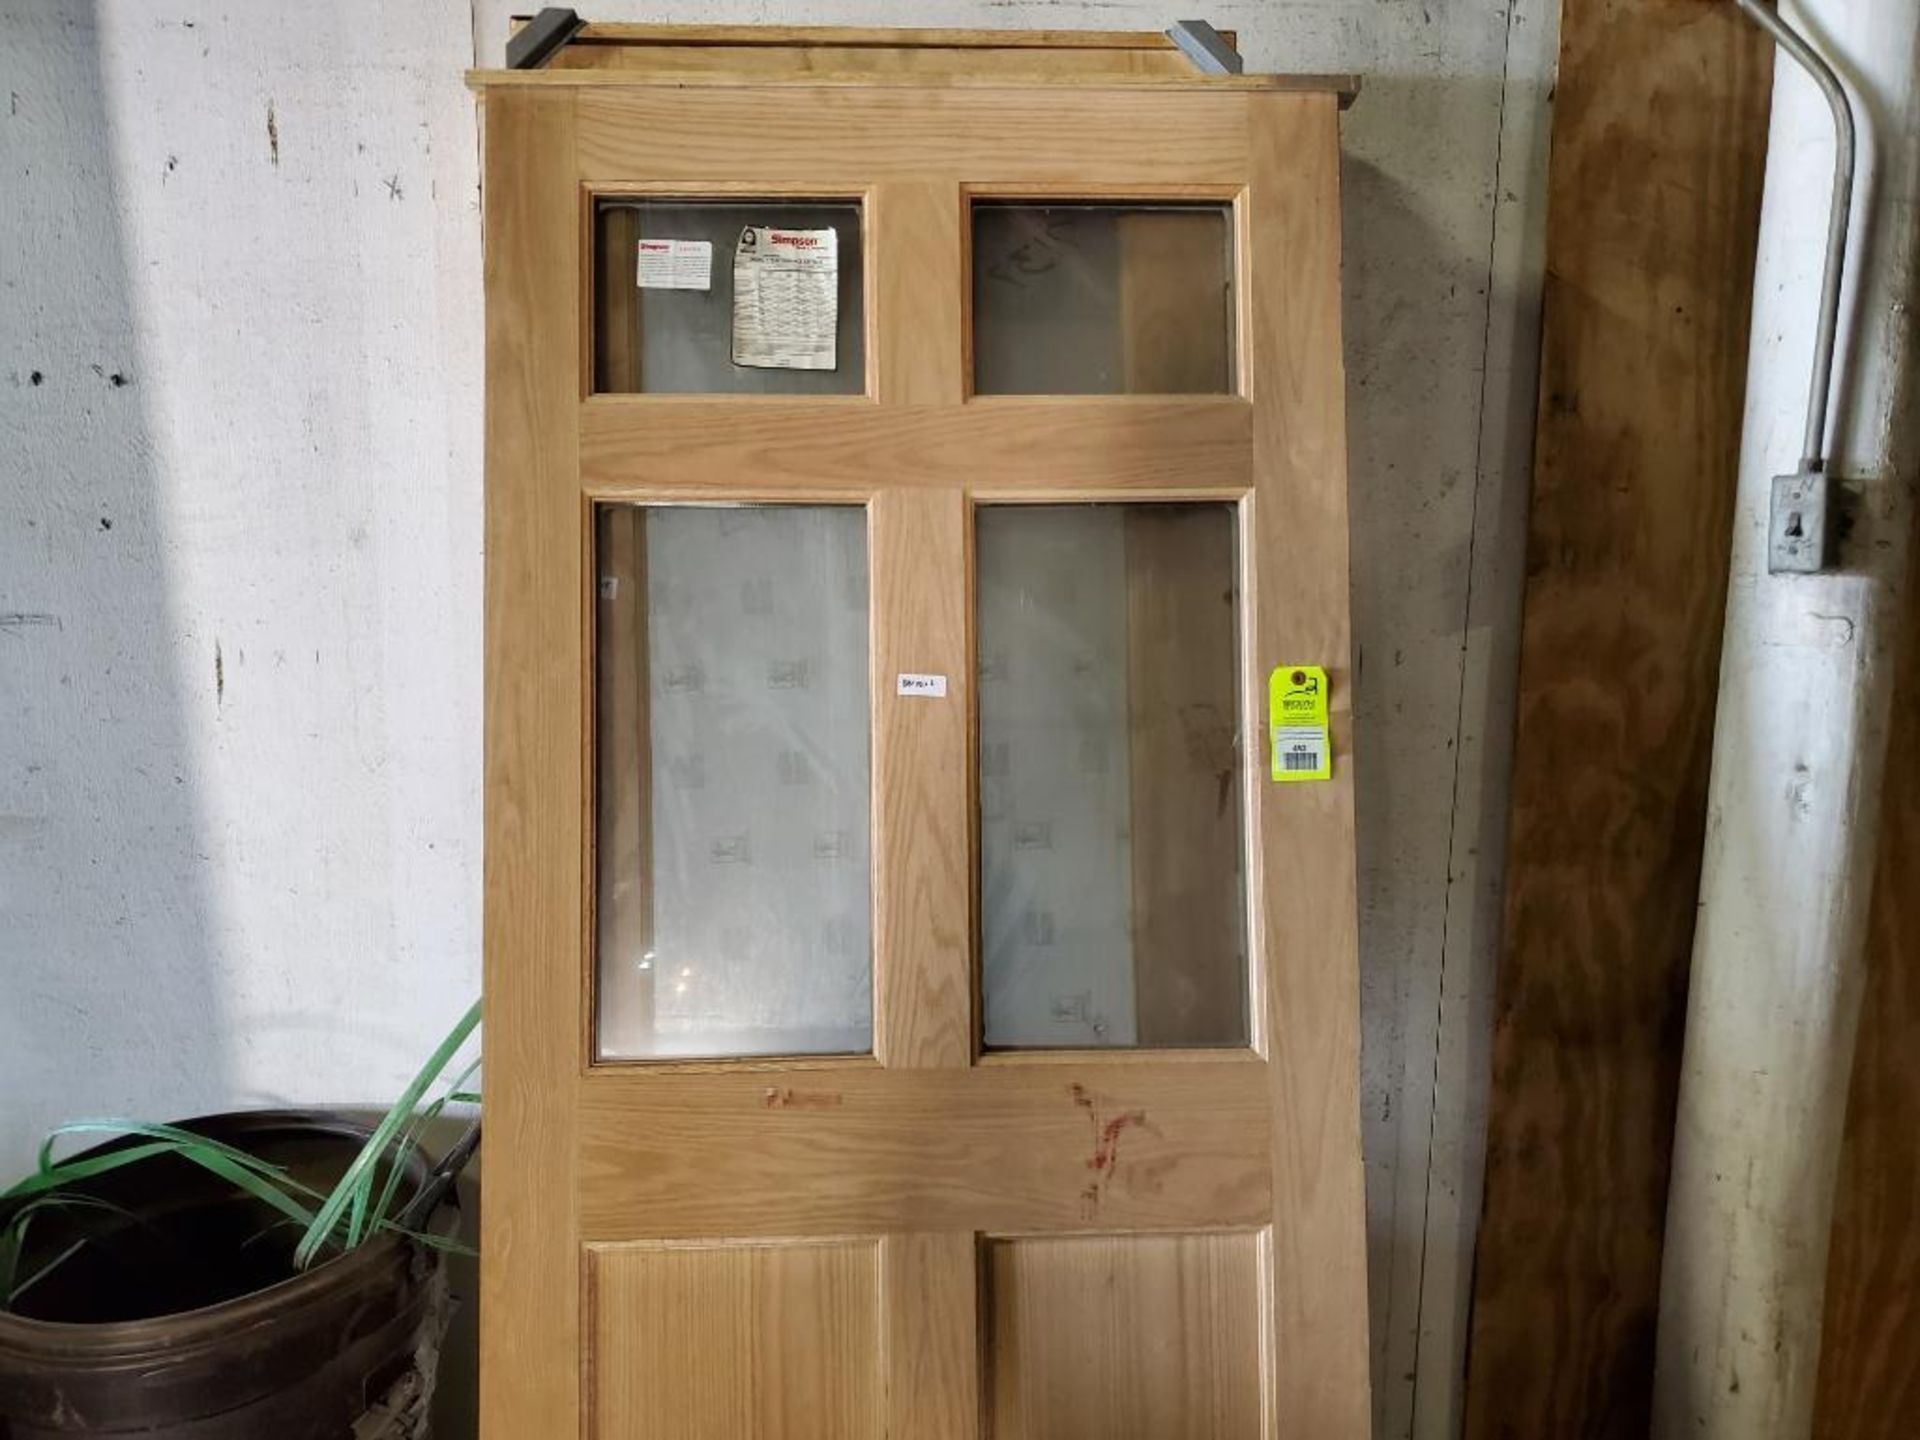 Qty 2 - Solid wood doors. 36in x 80in.